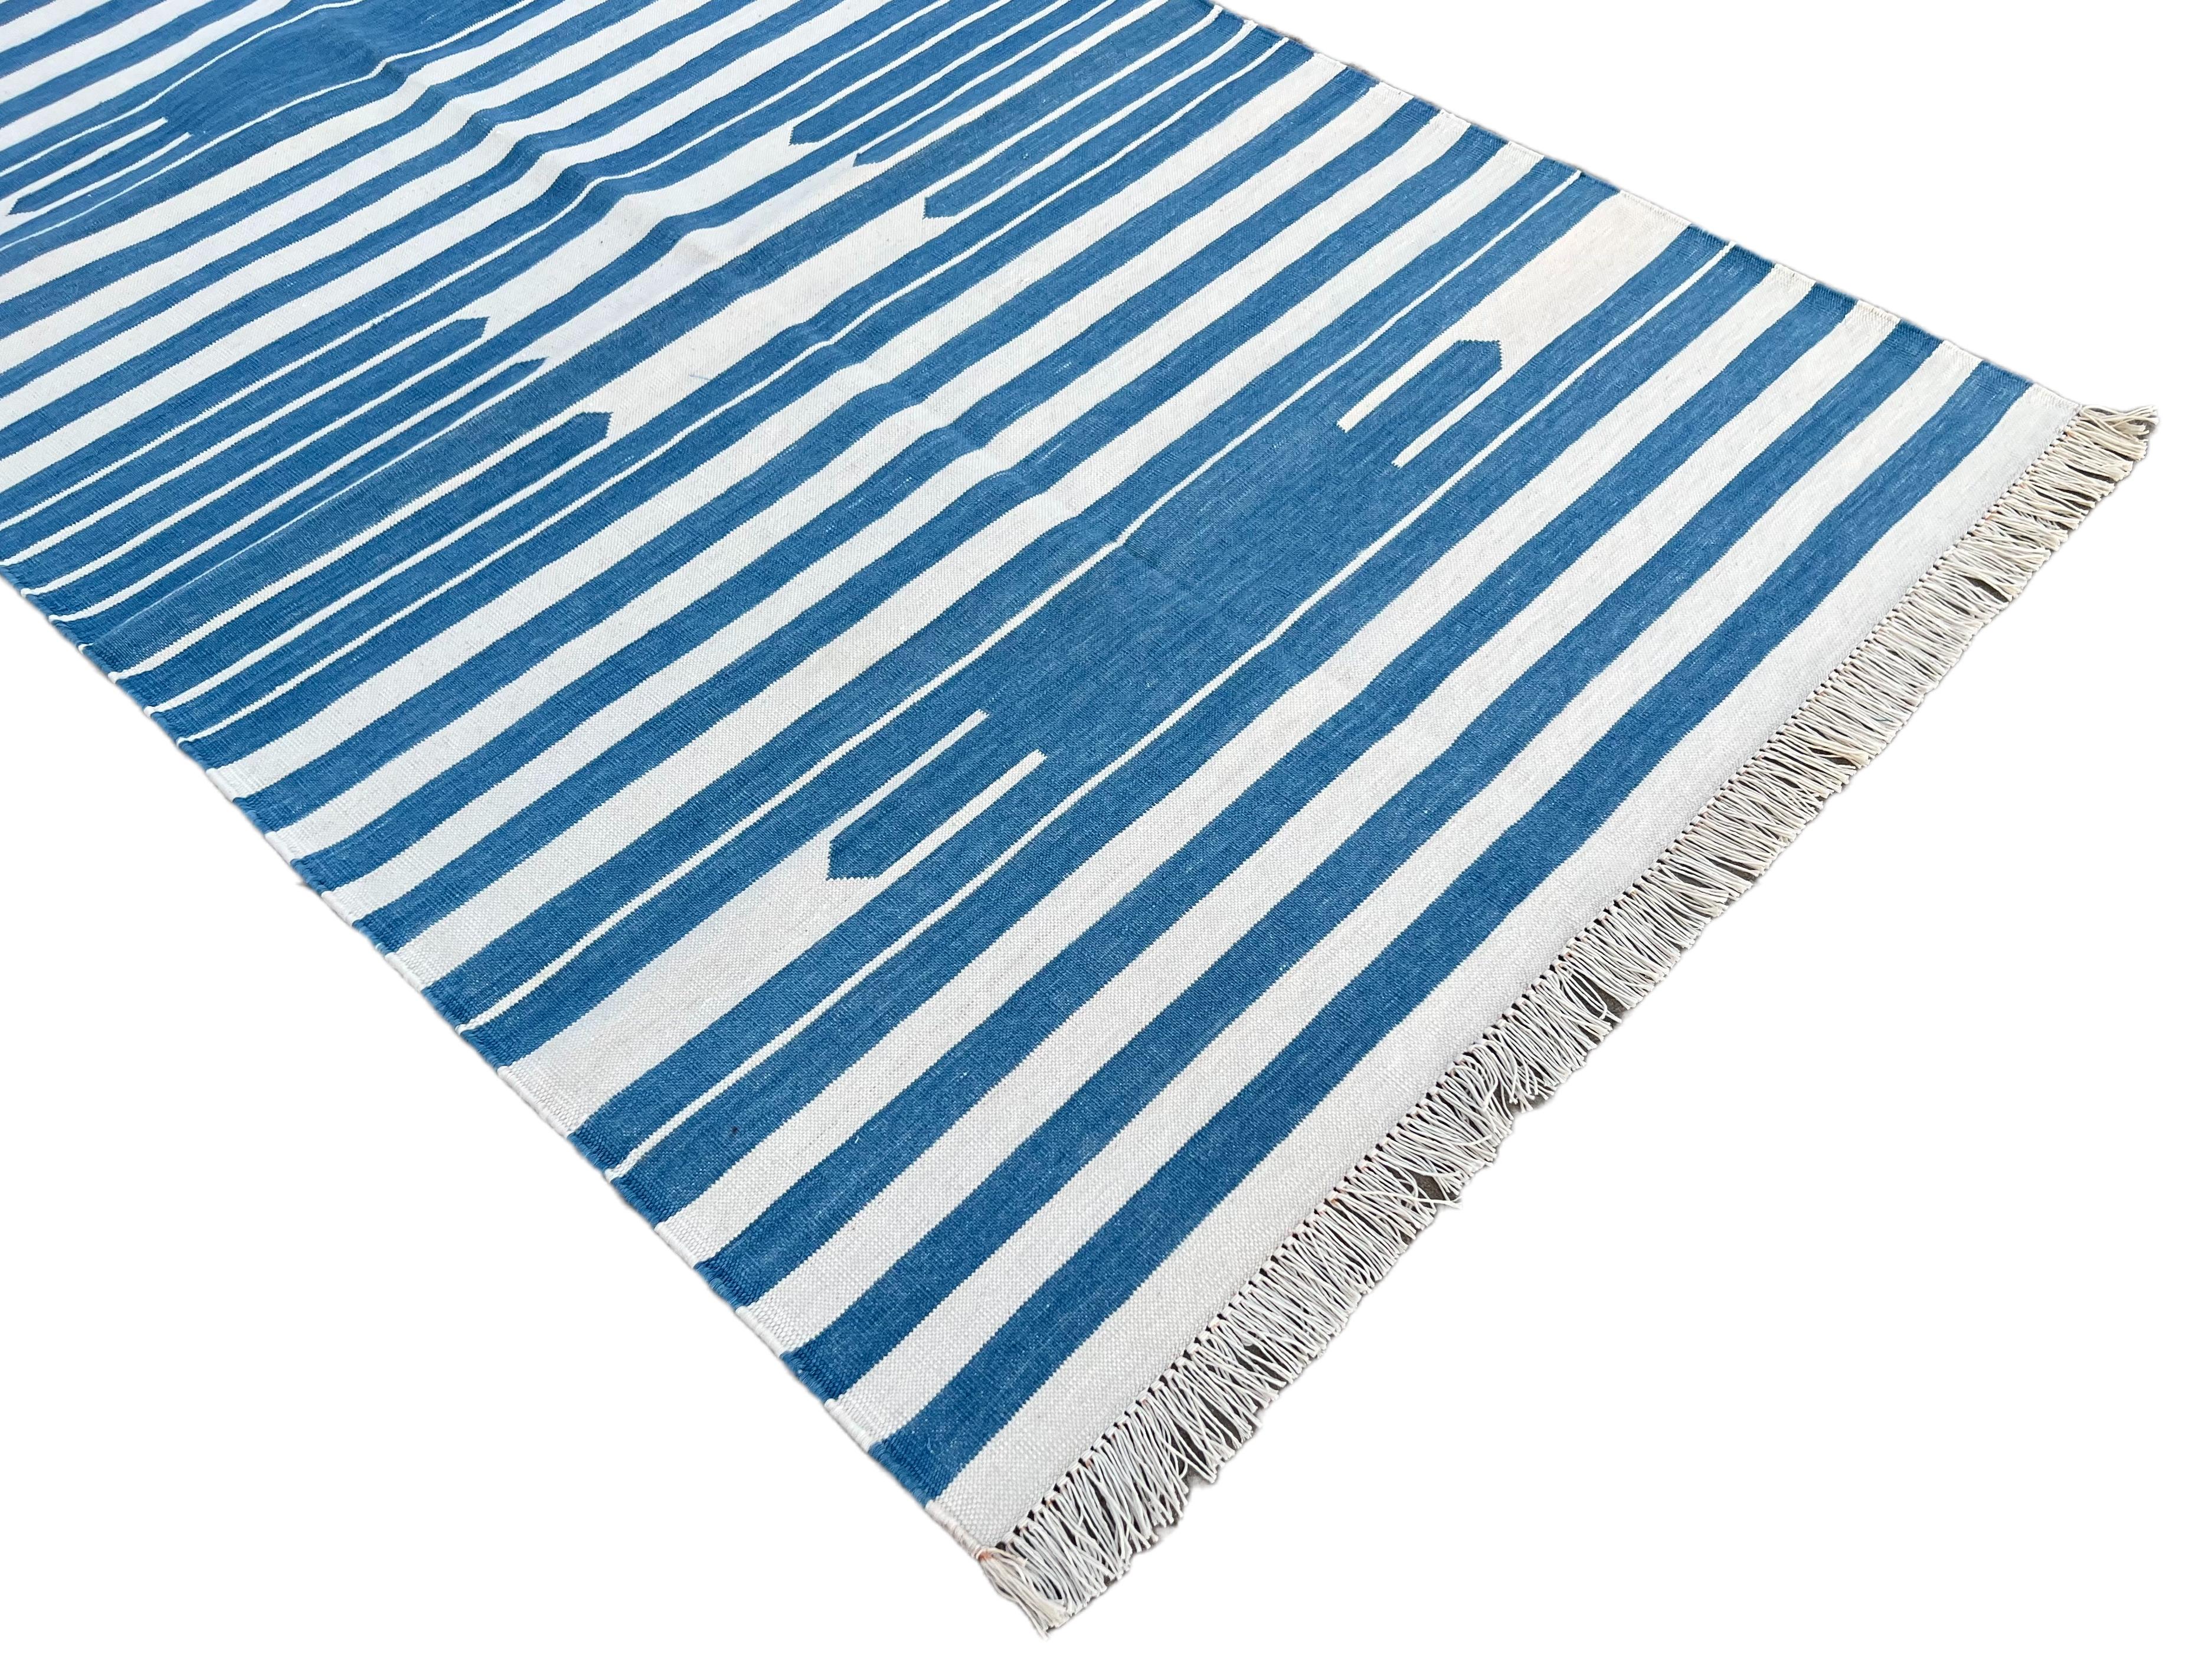 Mid-Century Modern Handmade Cotton Area Flat Weave Rug, 3'x5' Blue And White Striped Indian Dhurrie For Sale